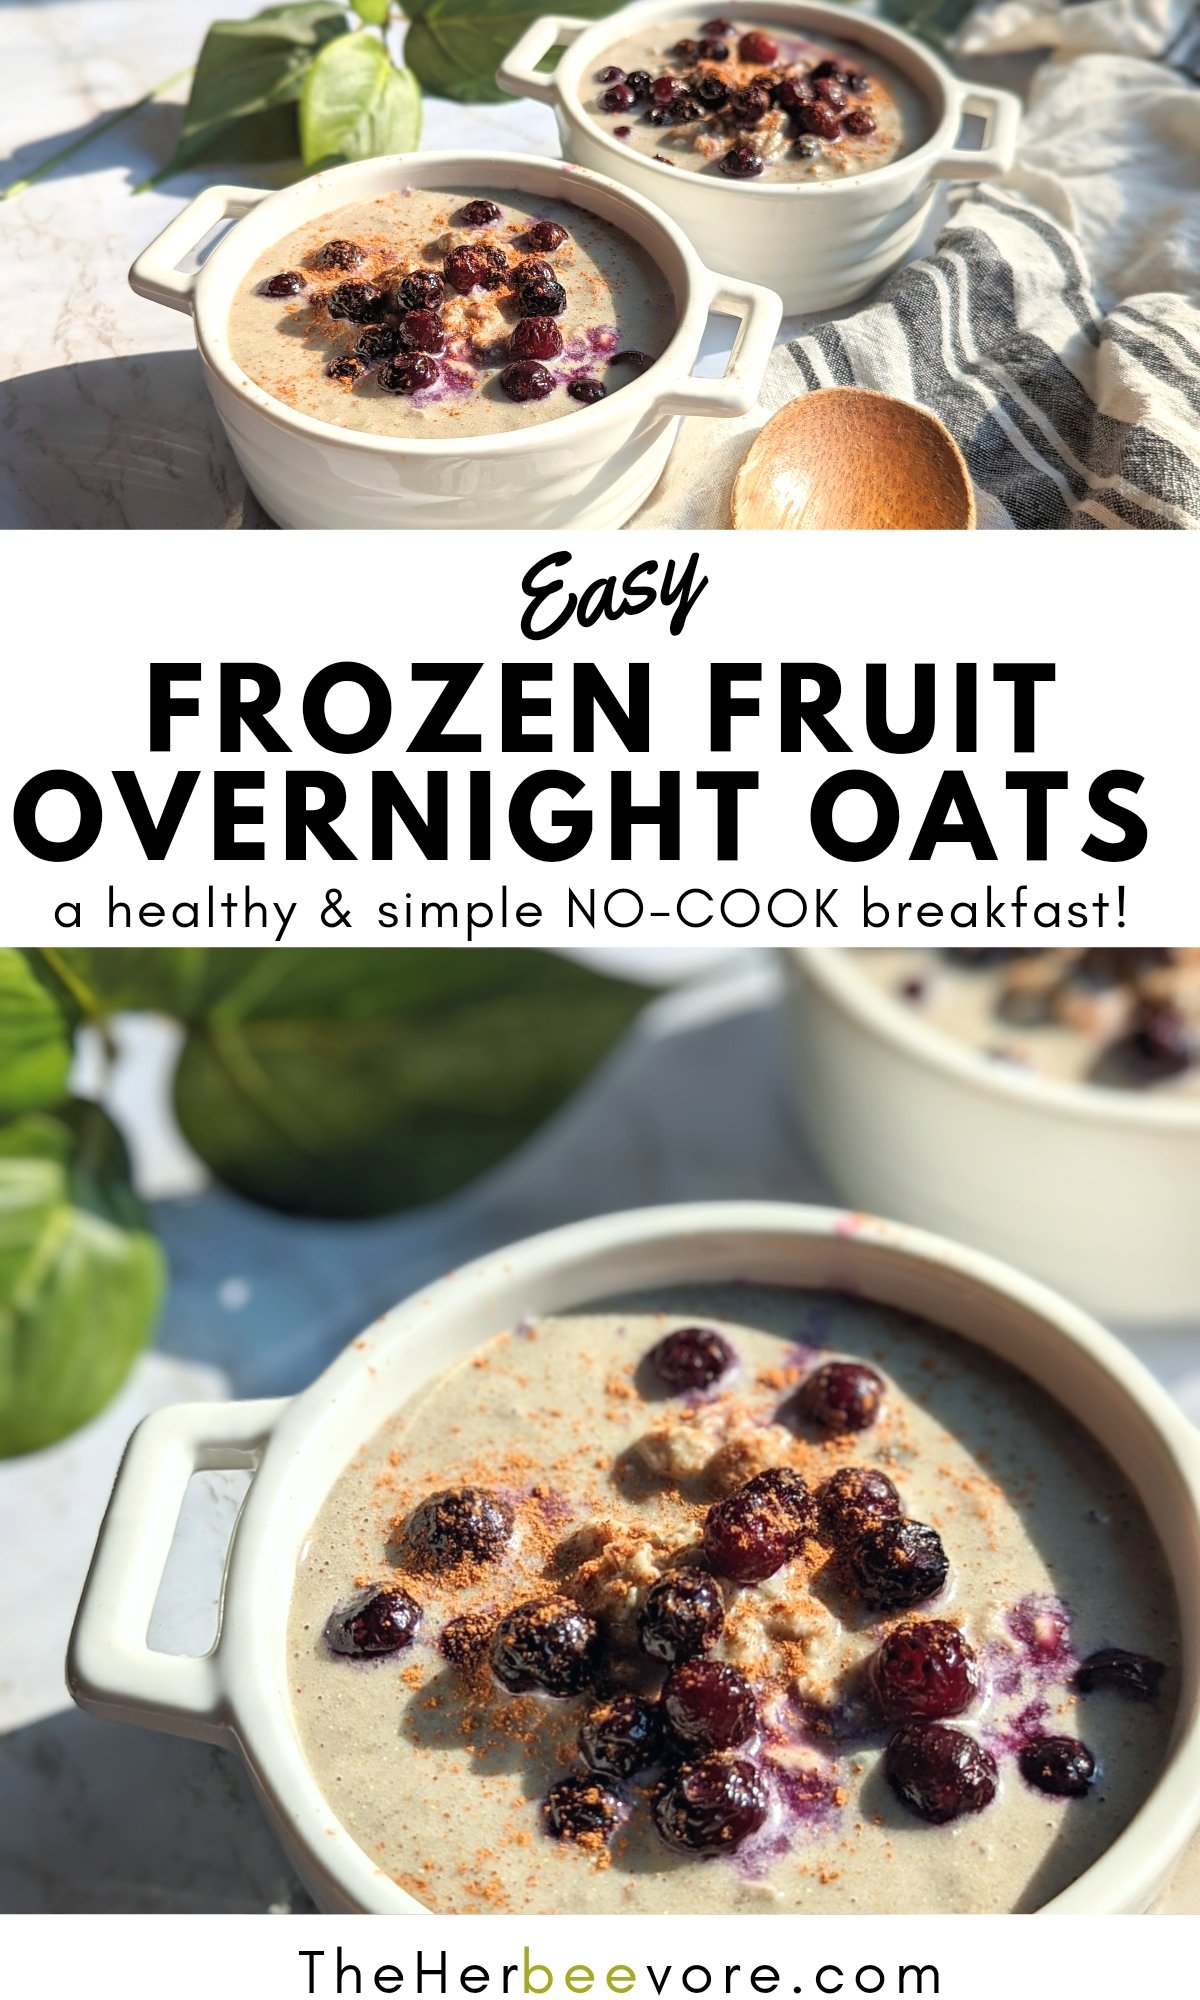 overnight oats with frozen fruit recipe blueberry overnight oats recipe with frozen berries in oatmeal